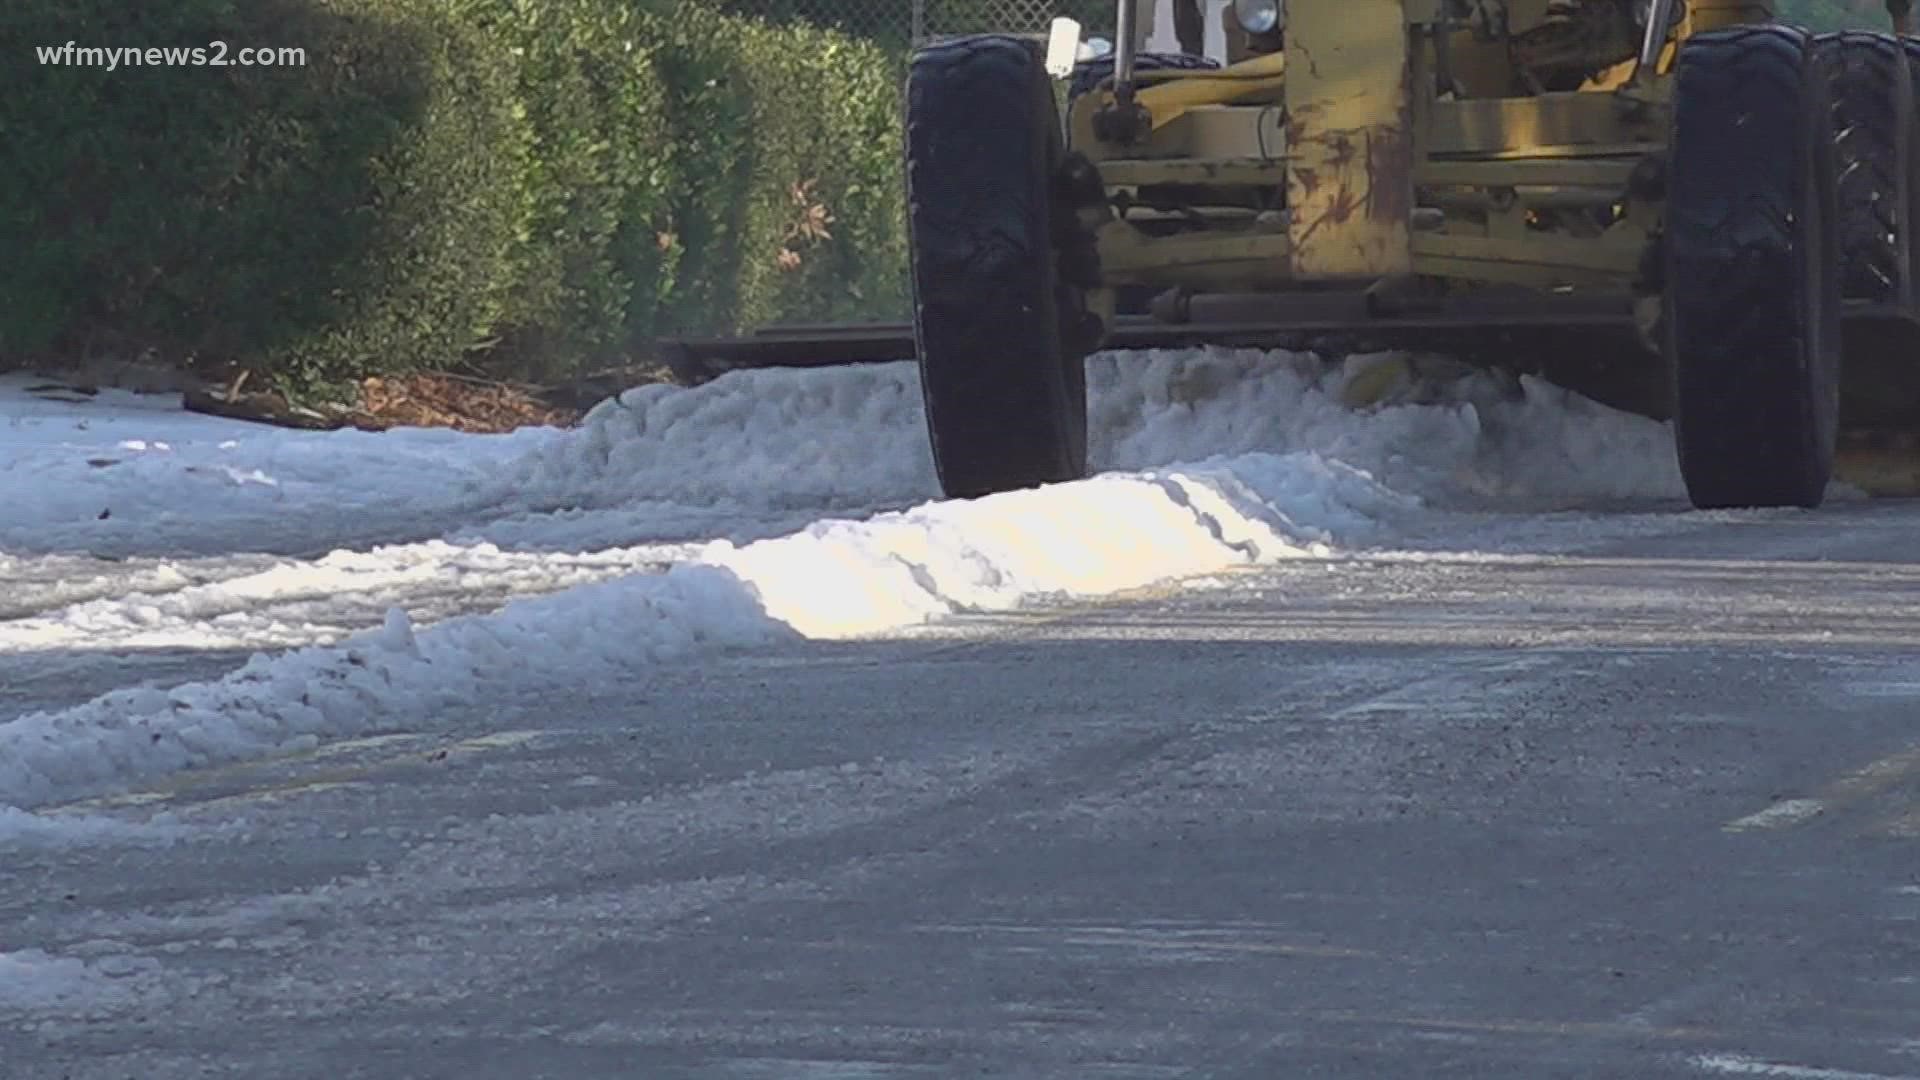 Guilford County Schools decided to go remote for Thursday and Friday. Still, crews cleared the remaining ice outside school buildings.